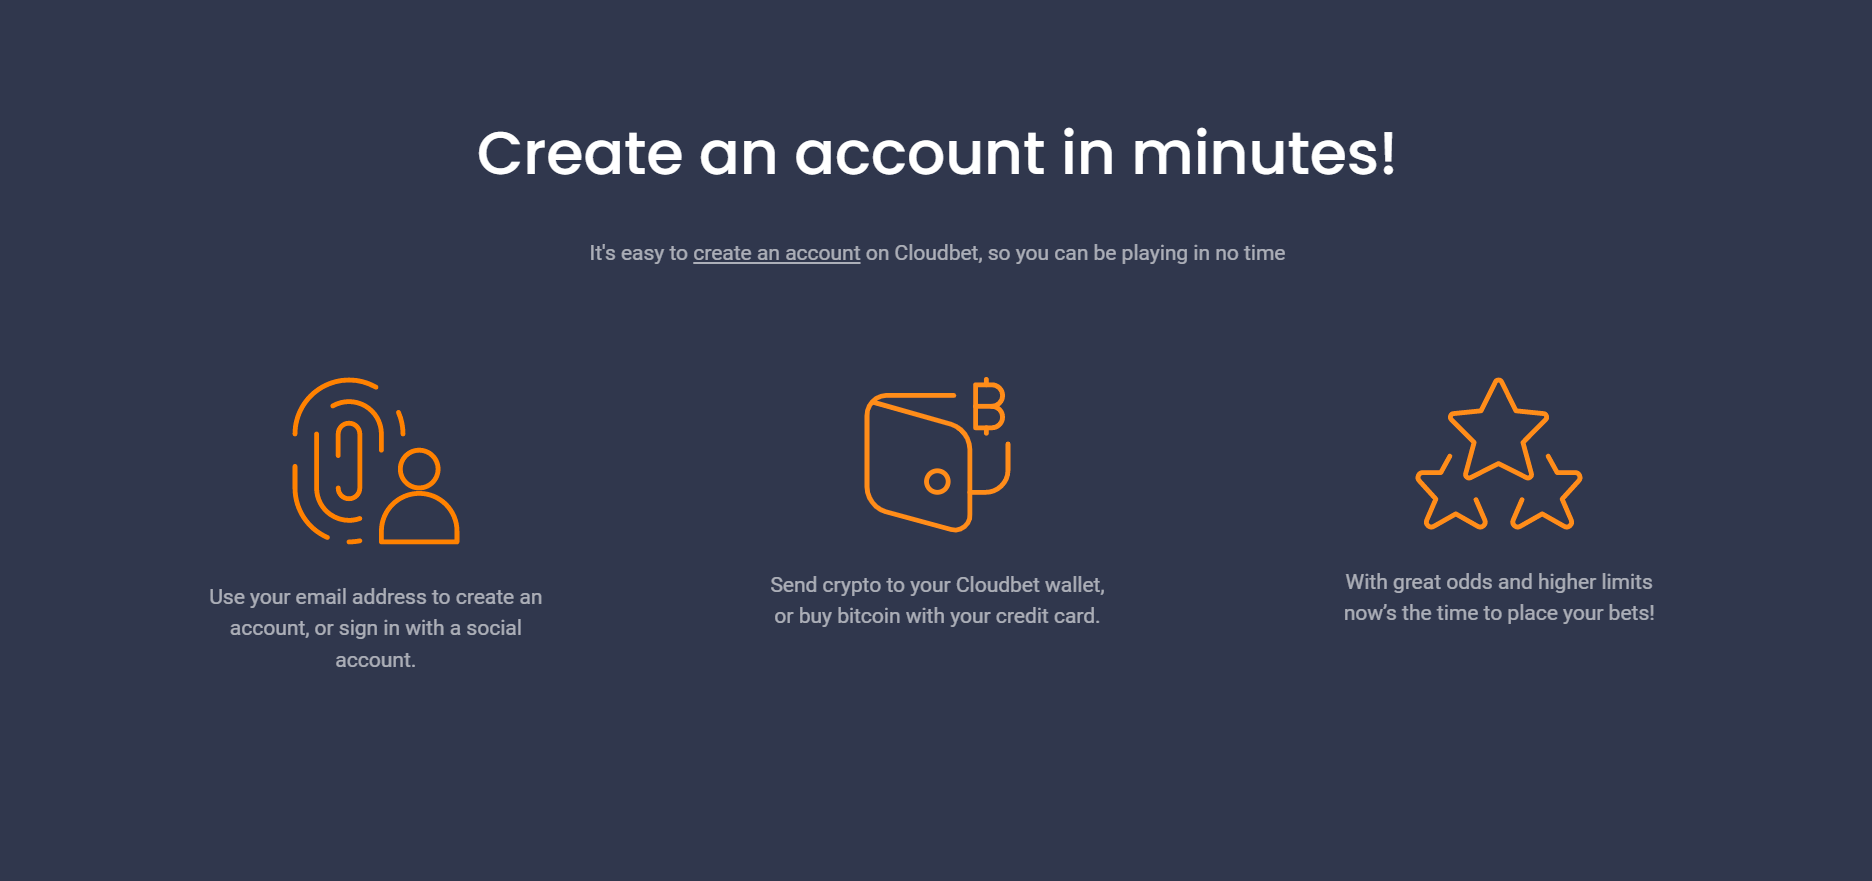 create an account in minutes